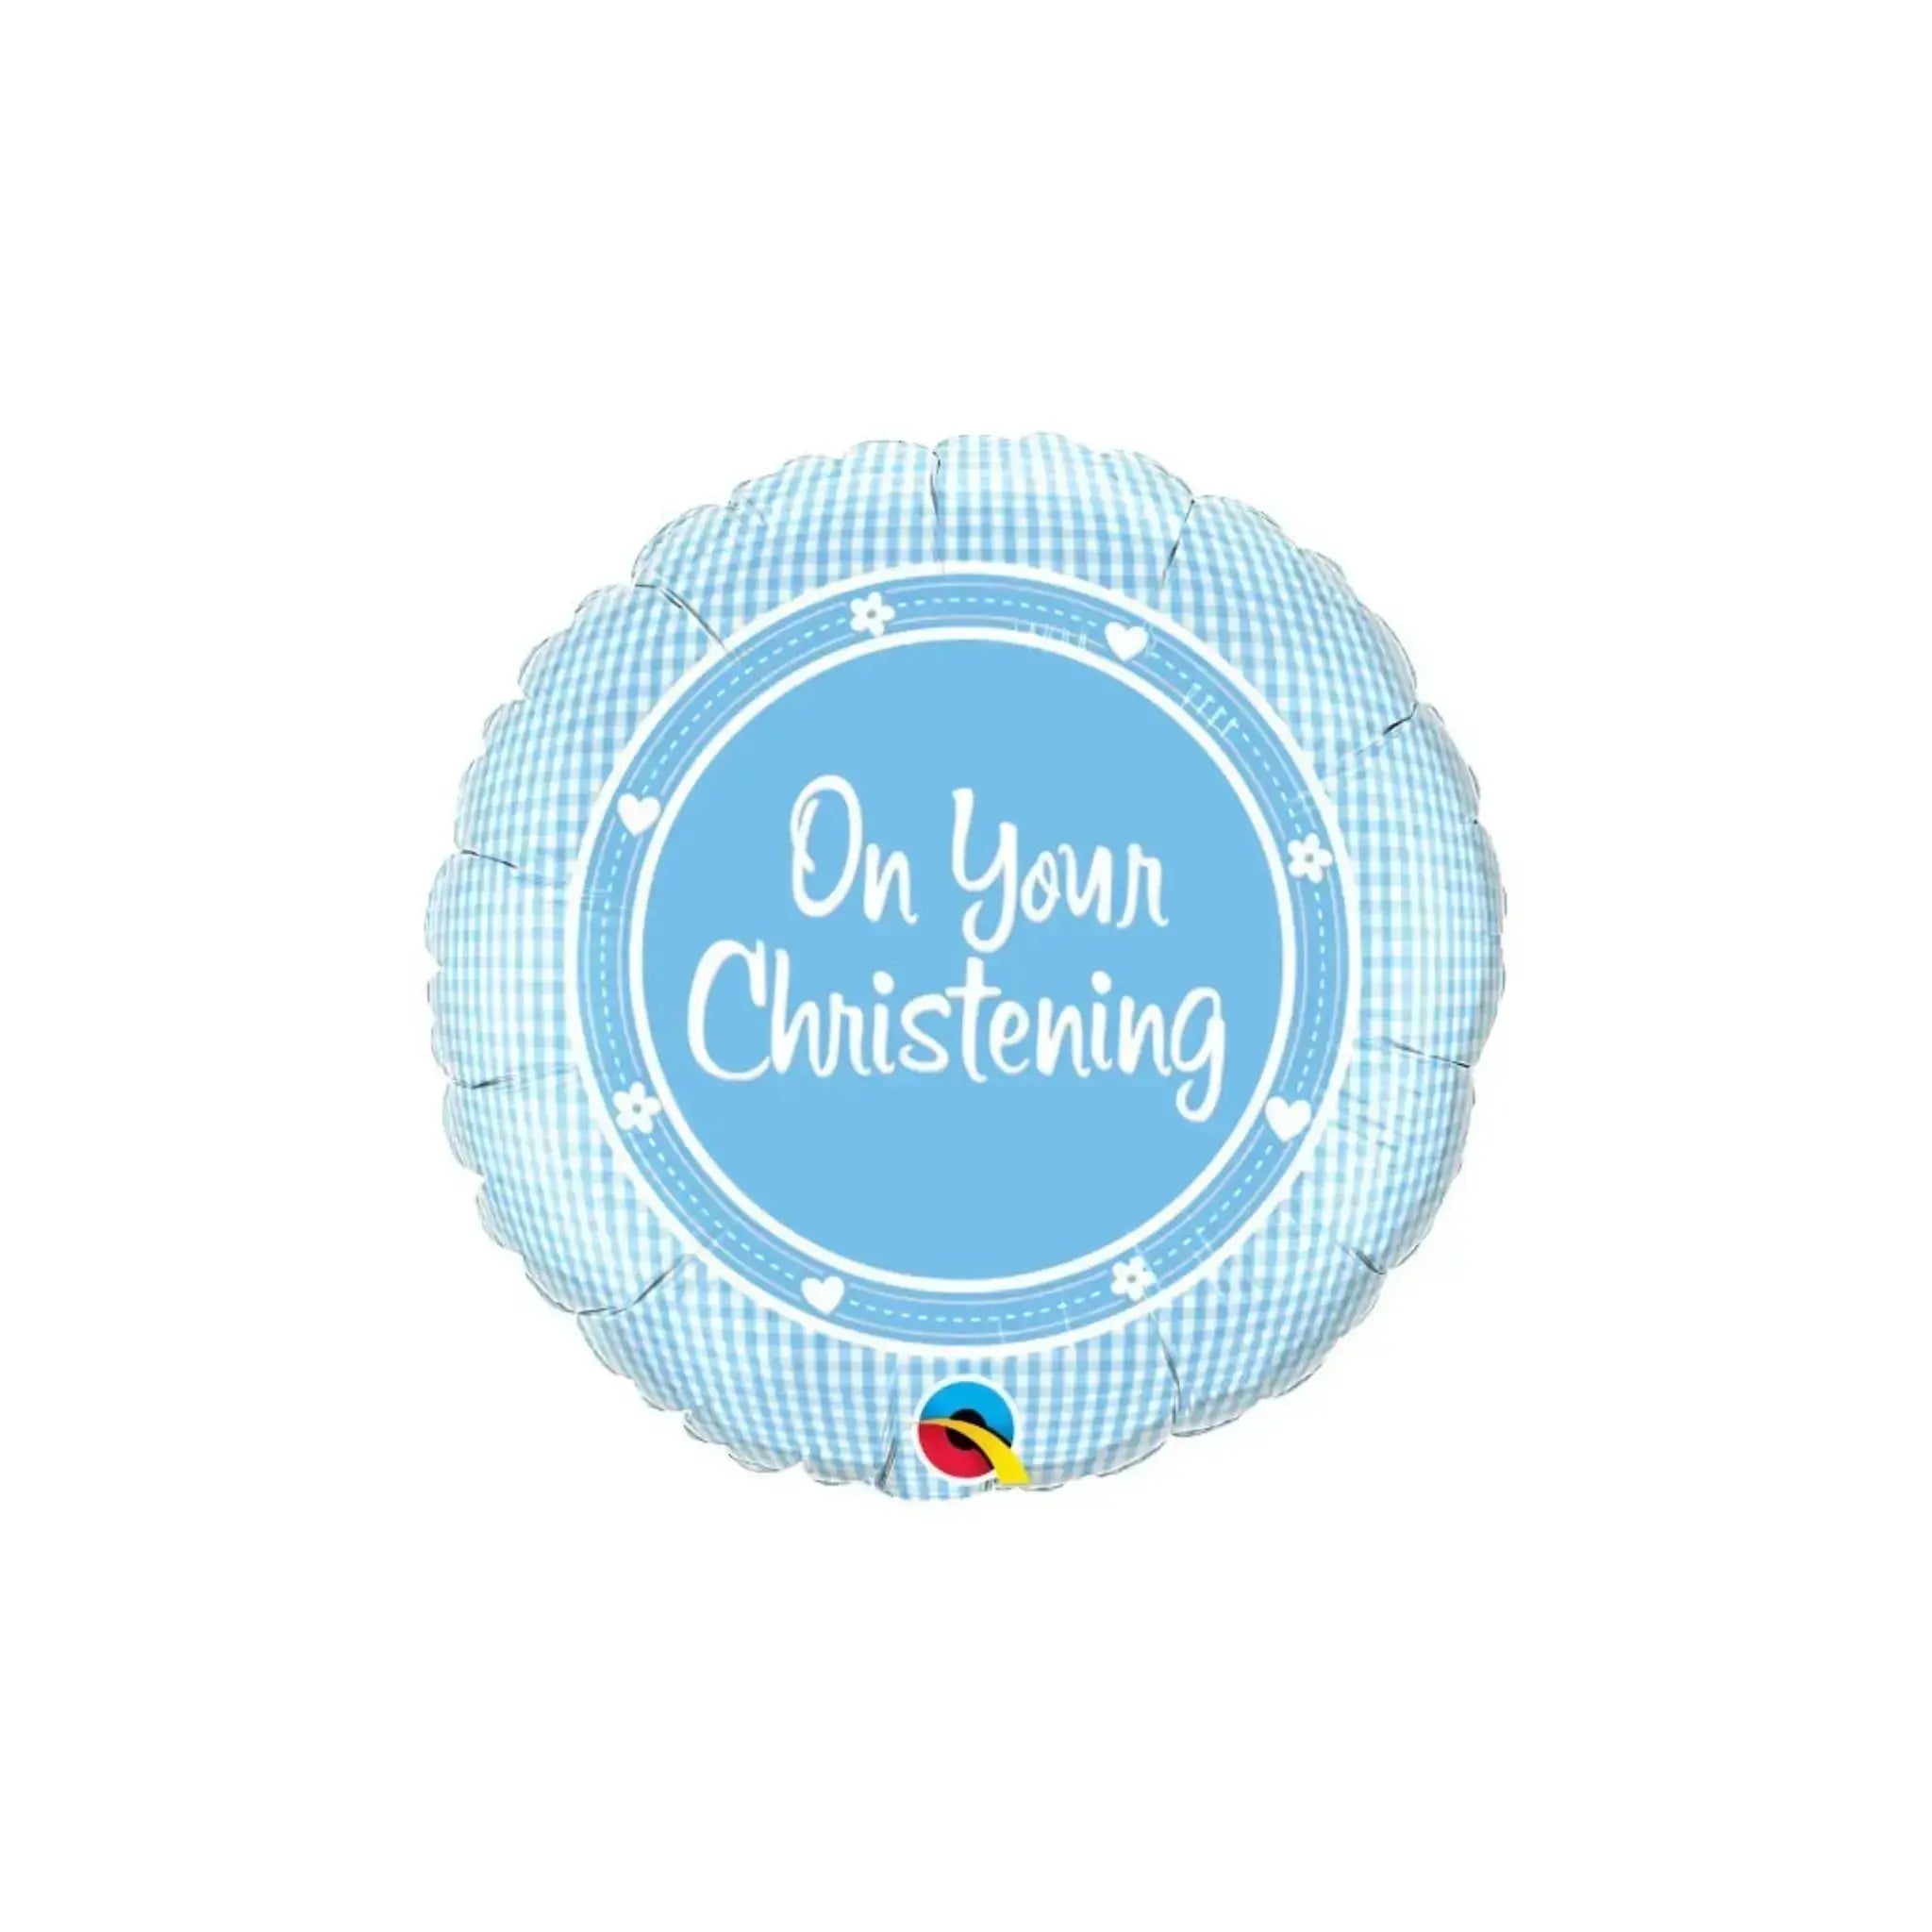 On Your Christening Blue Plaid Balloon | The Party Hut